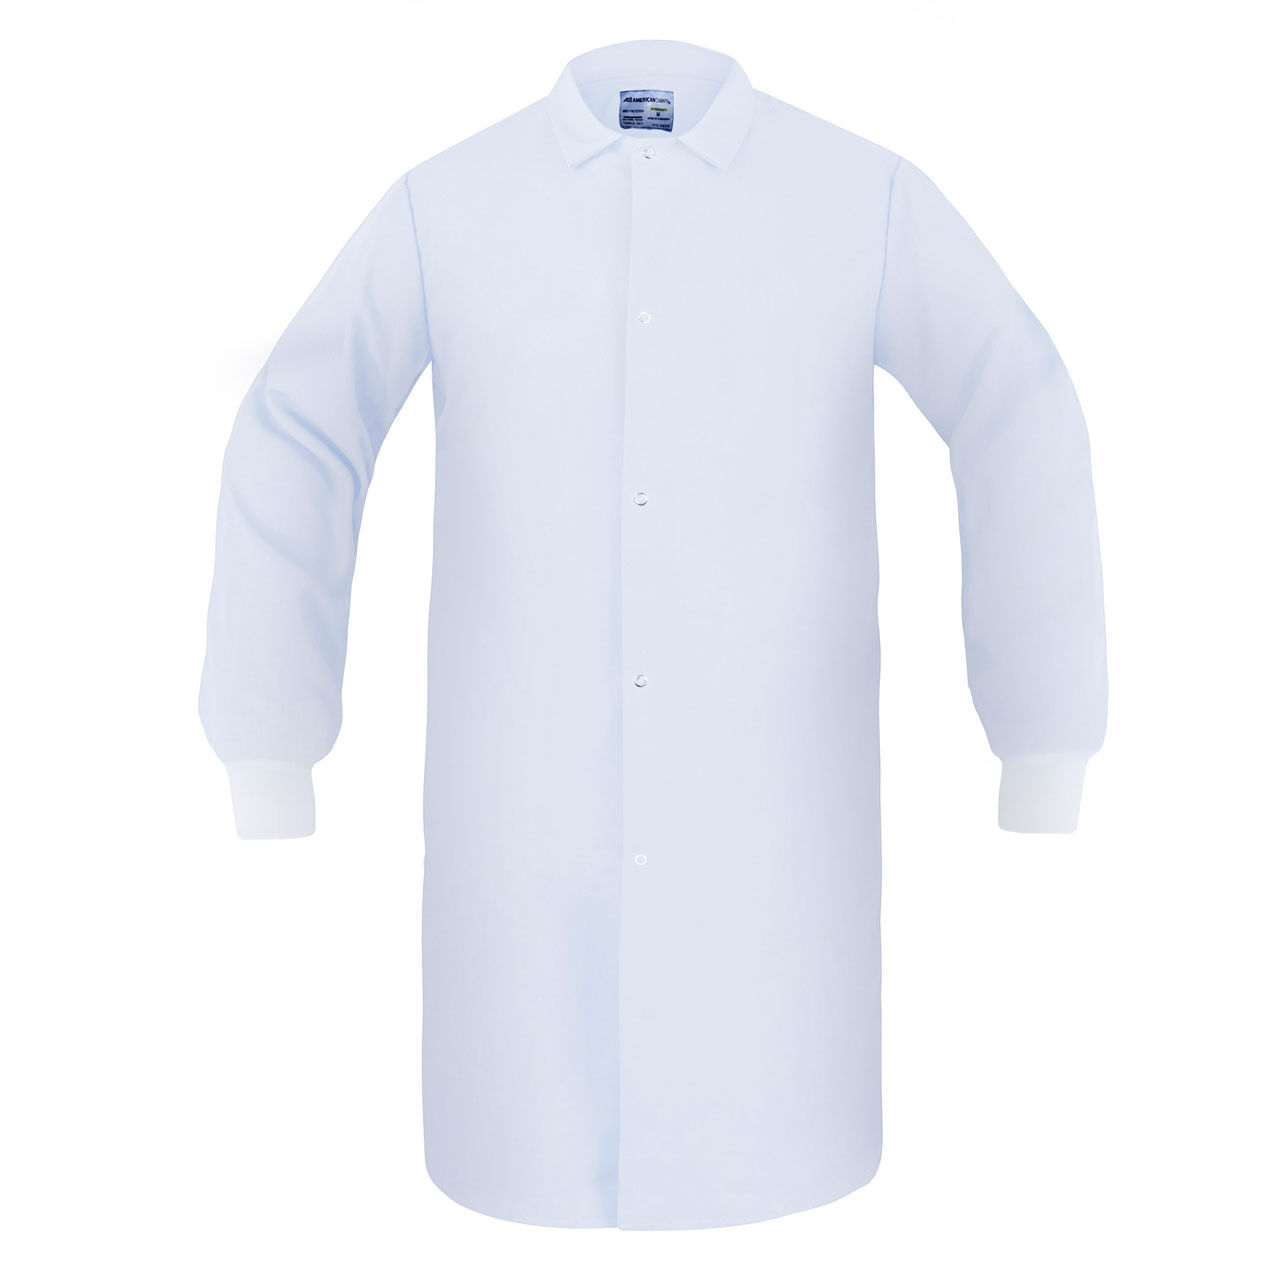 HACCP Frock, No Pocket, Knit Cuff, White Questions & Answers